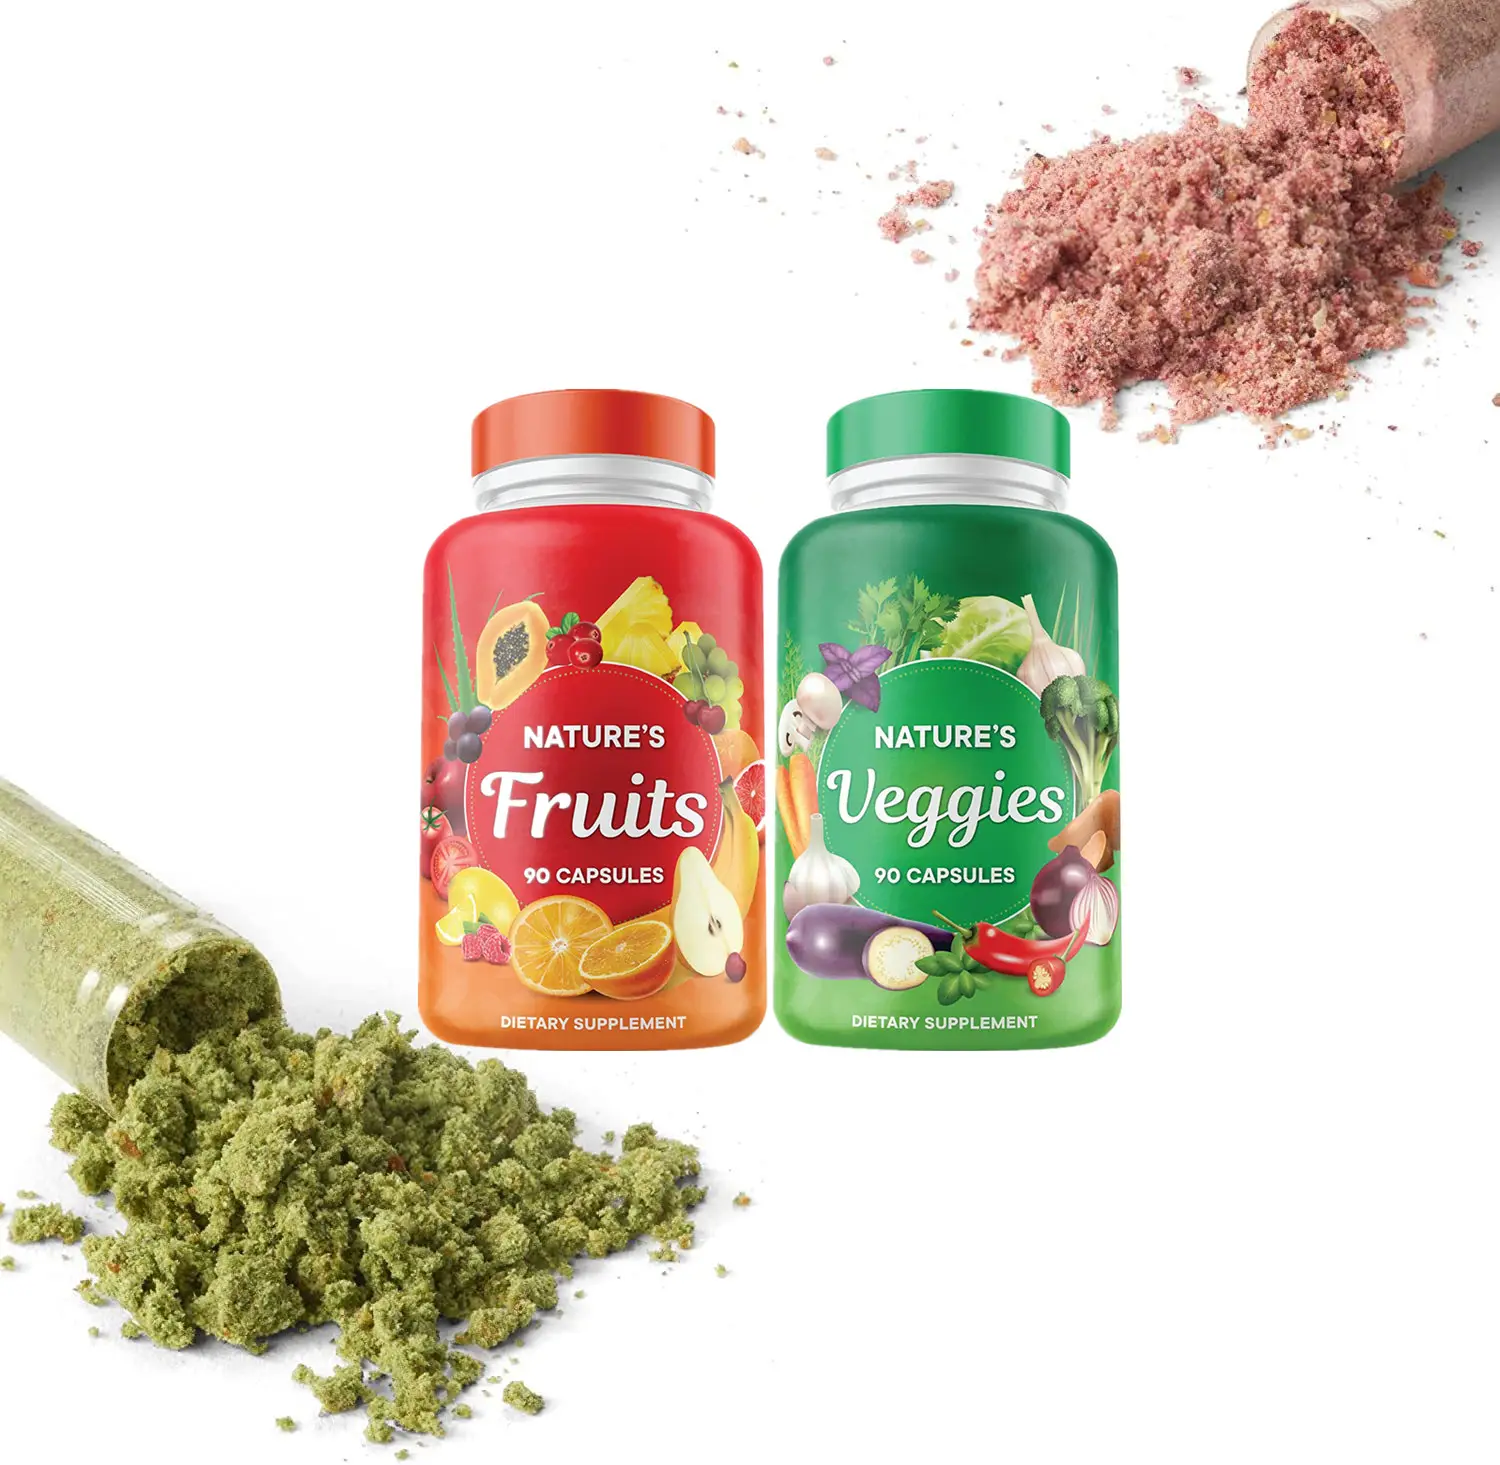 Hot Fruits and Veggies Capsules OEM Whole Food Supplement with Superfood Fruits and Vegetables Improves Metabolism, Boosts Energ